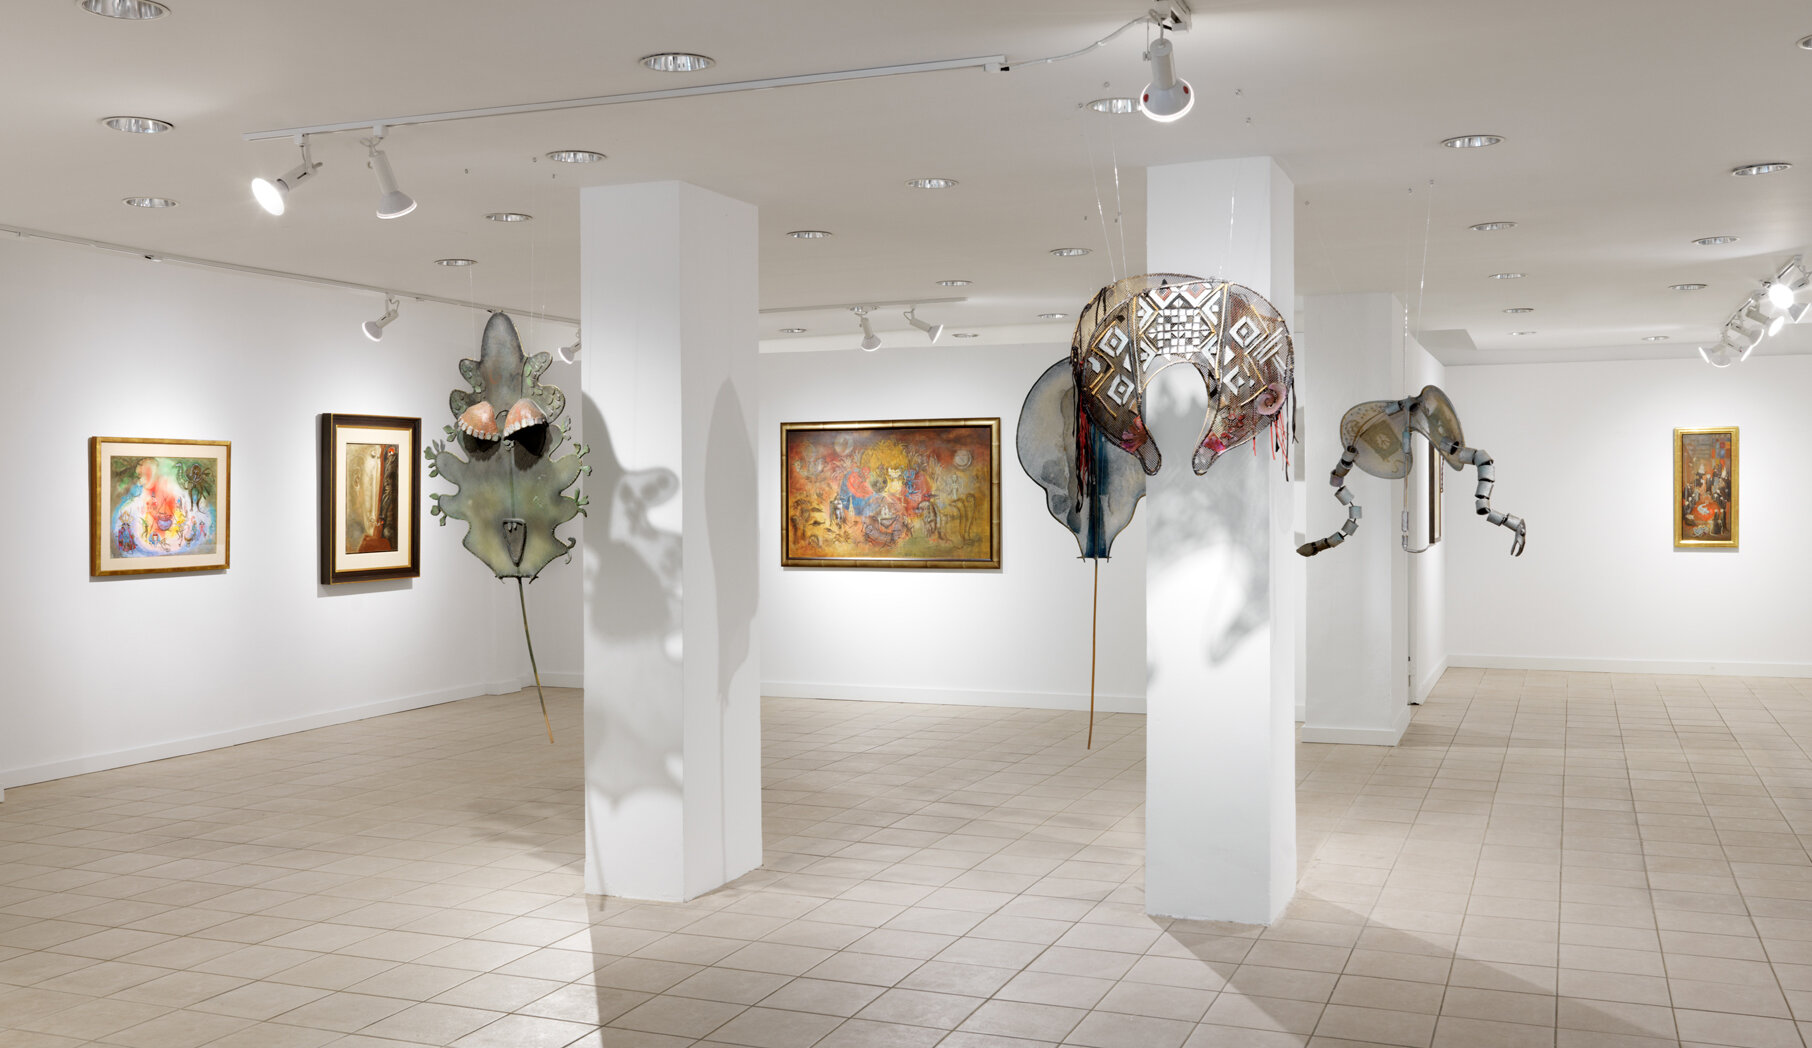   Leonora Carrington: The Story of the Last Egg , installation view, Gallery Wendi Norris Offsite, 926 Madison Avenue, New York, NY, May 23 - June 29, 2019, photography: Dan Bradica 